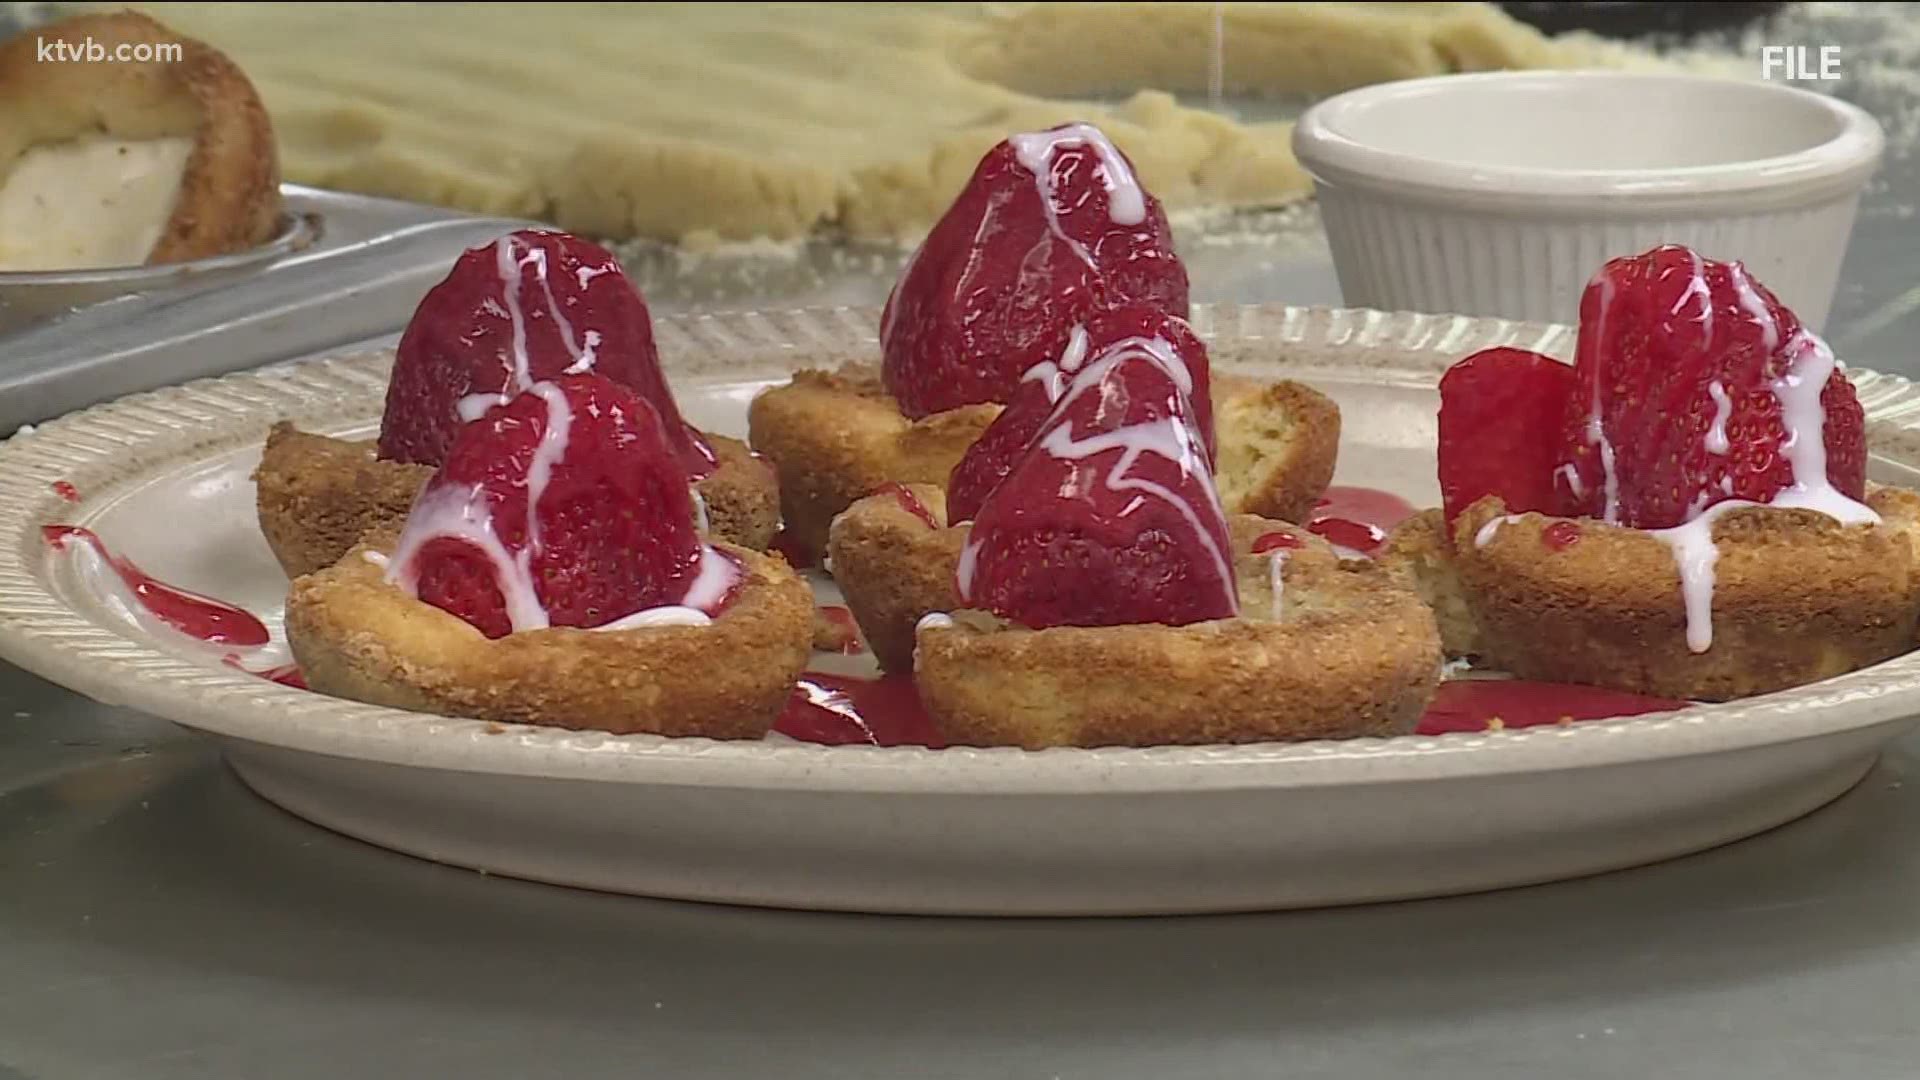 Garden master Jim Duthie is joined by Chef Lou Aaron who shows us a delicious summer recipe made with strawberries.